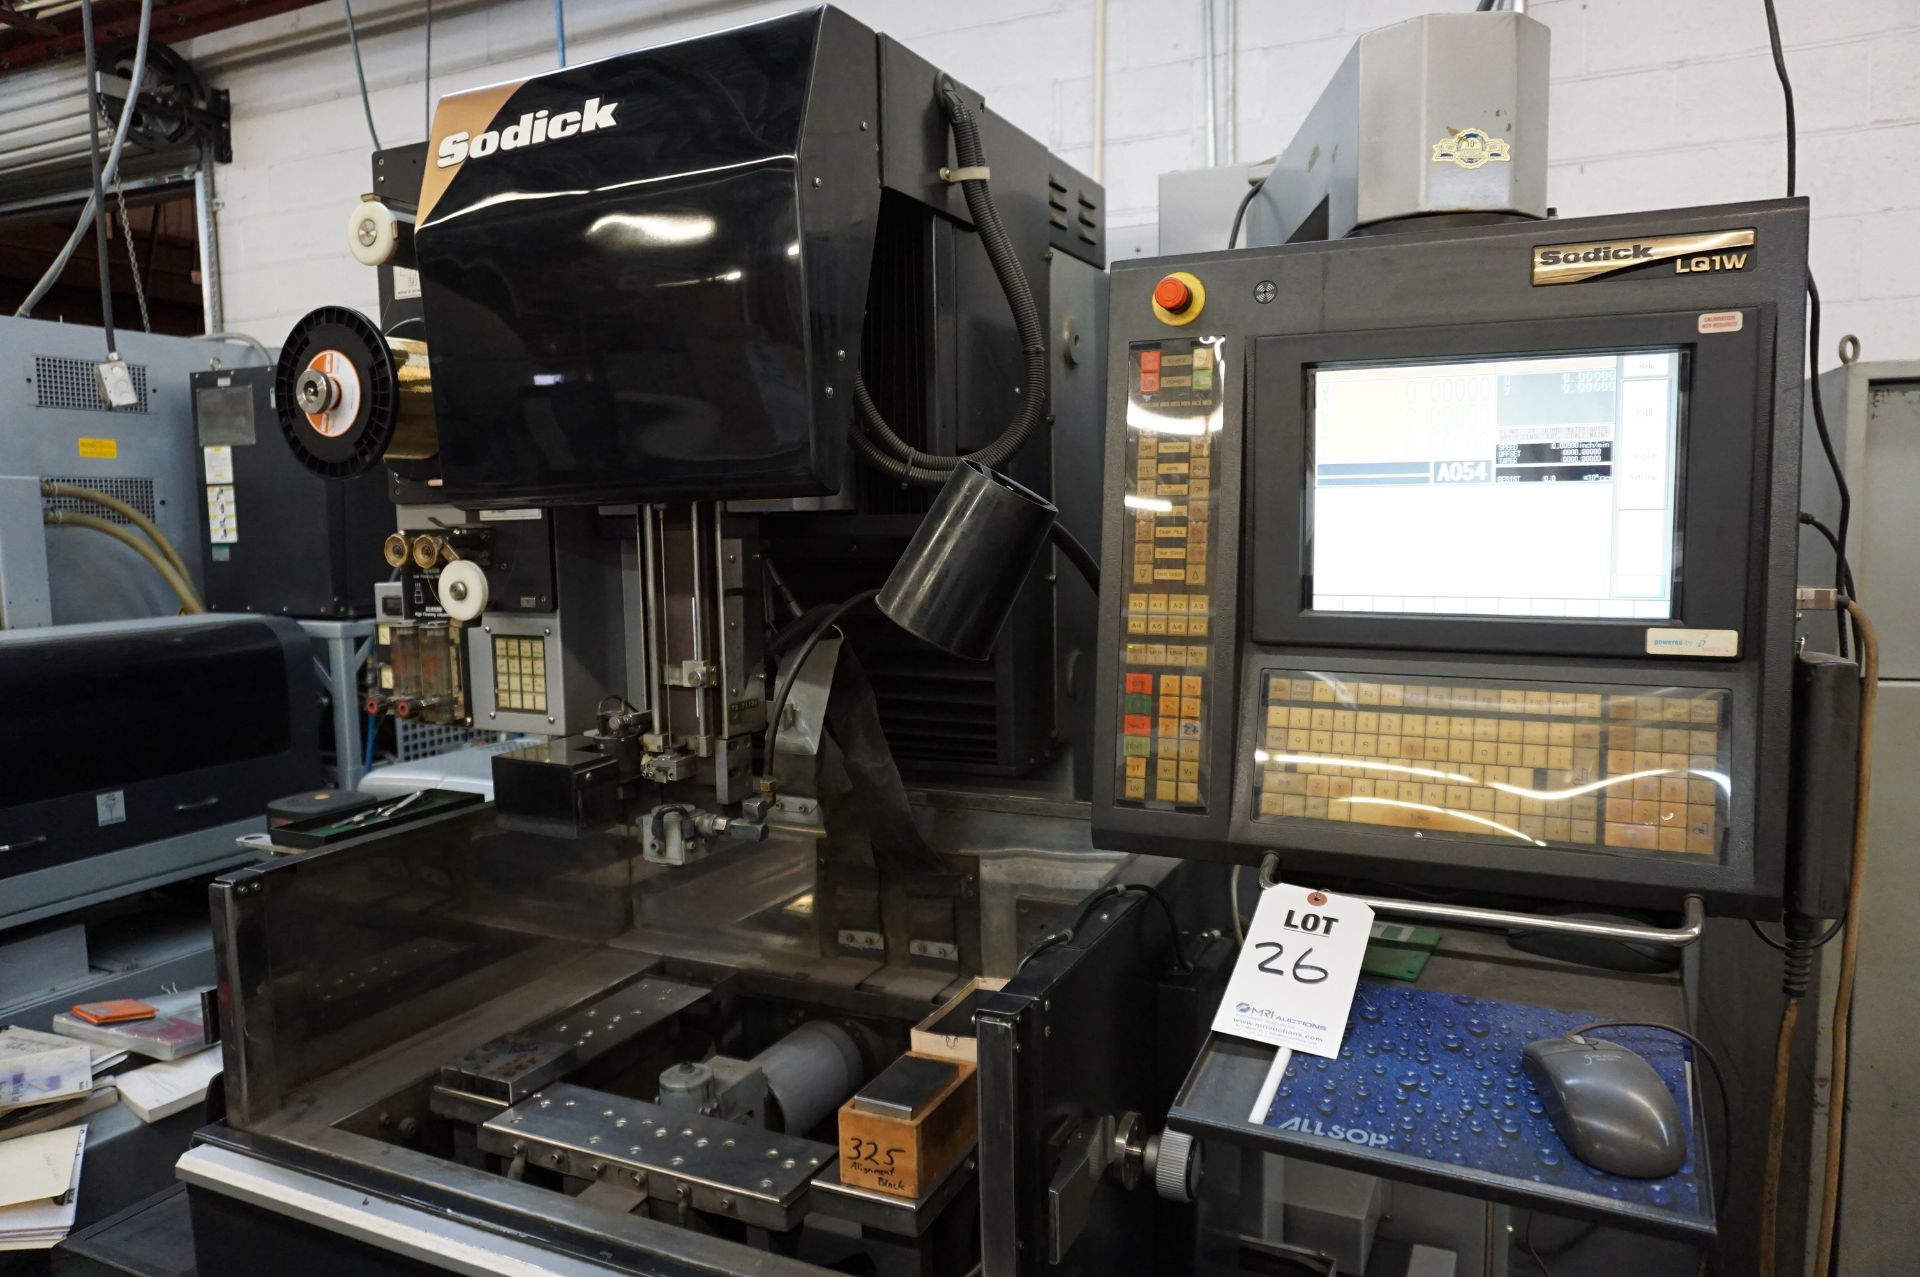 2004 SODICK AQ325L WIRE EDM, S/N 2112, WITH LQ1W CONTROL S/N 0407, CUT TIME 6,697 HOURS, WITH - Image 3 of 13